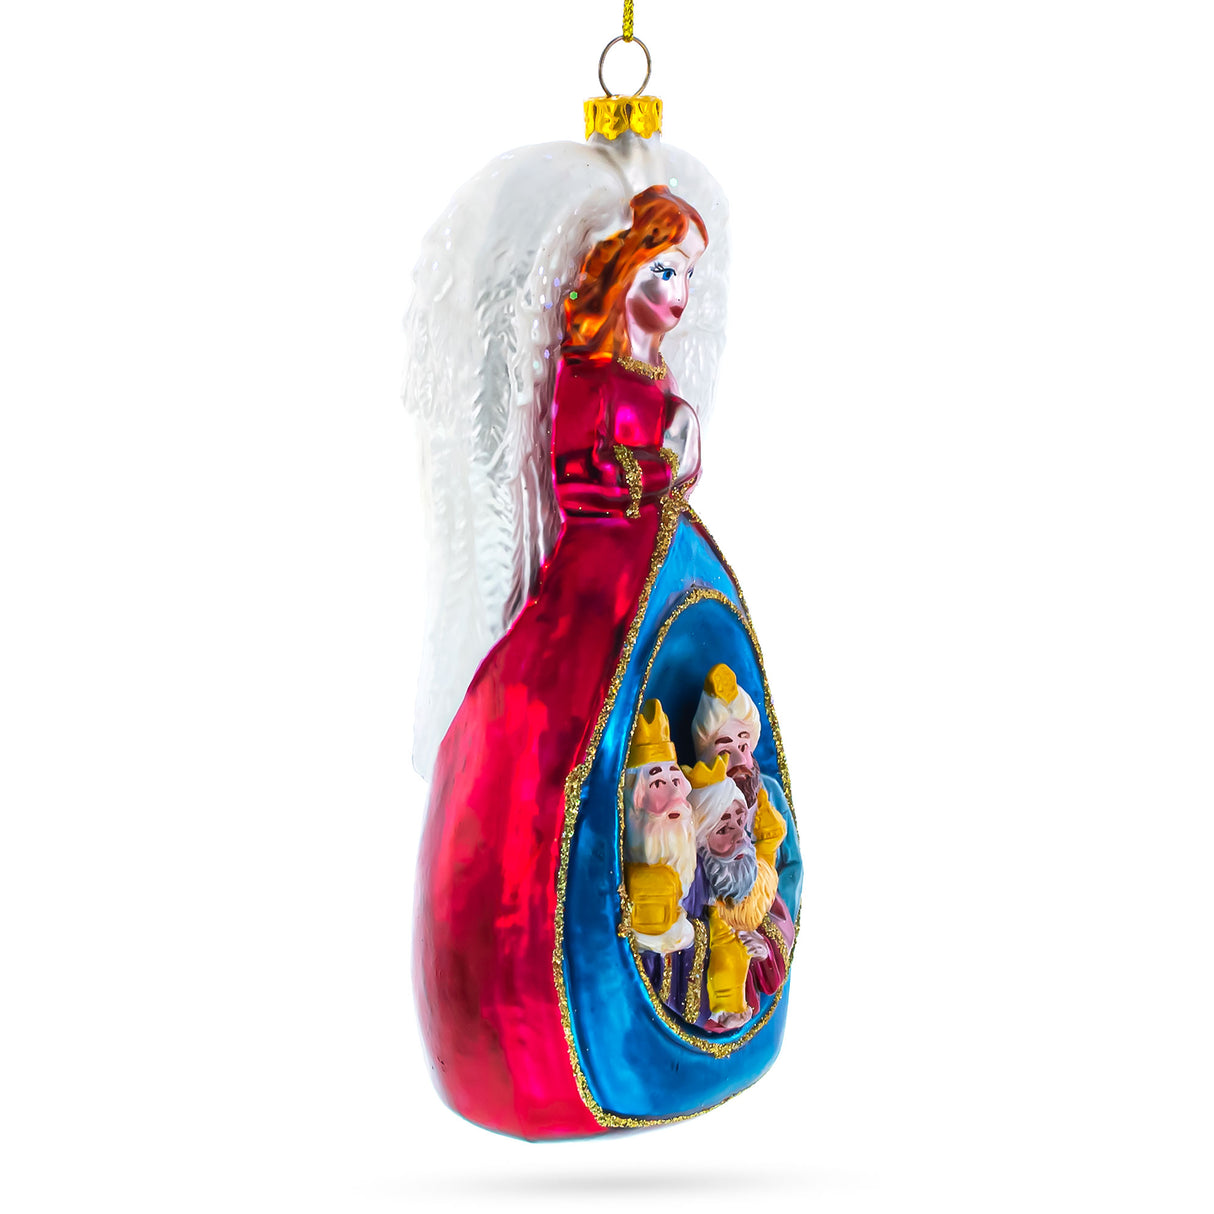 Buy Christmas Ornaments Religious Nativity Angels by BestPysanky Online Gift Ship